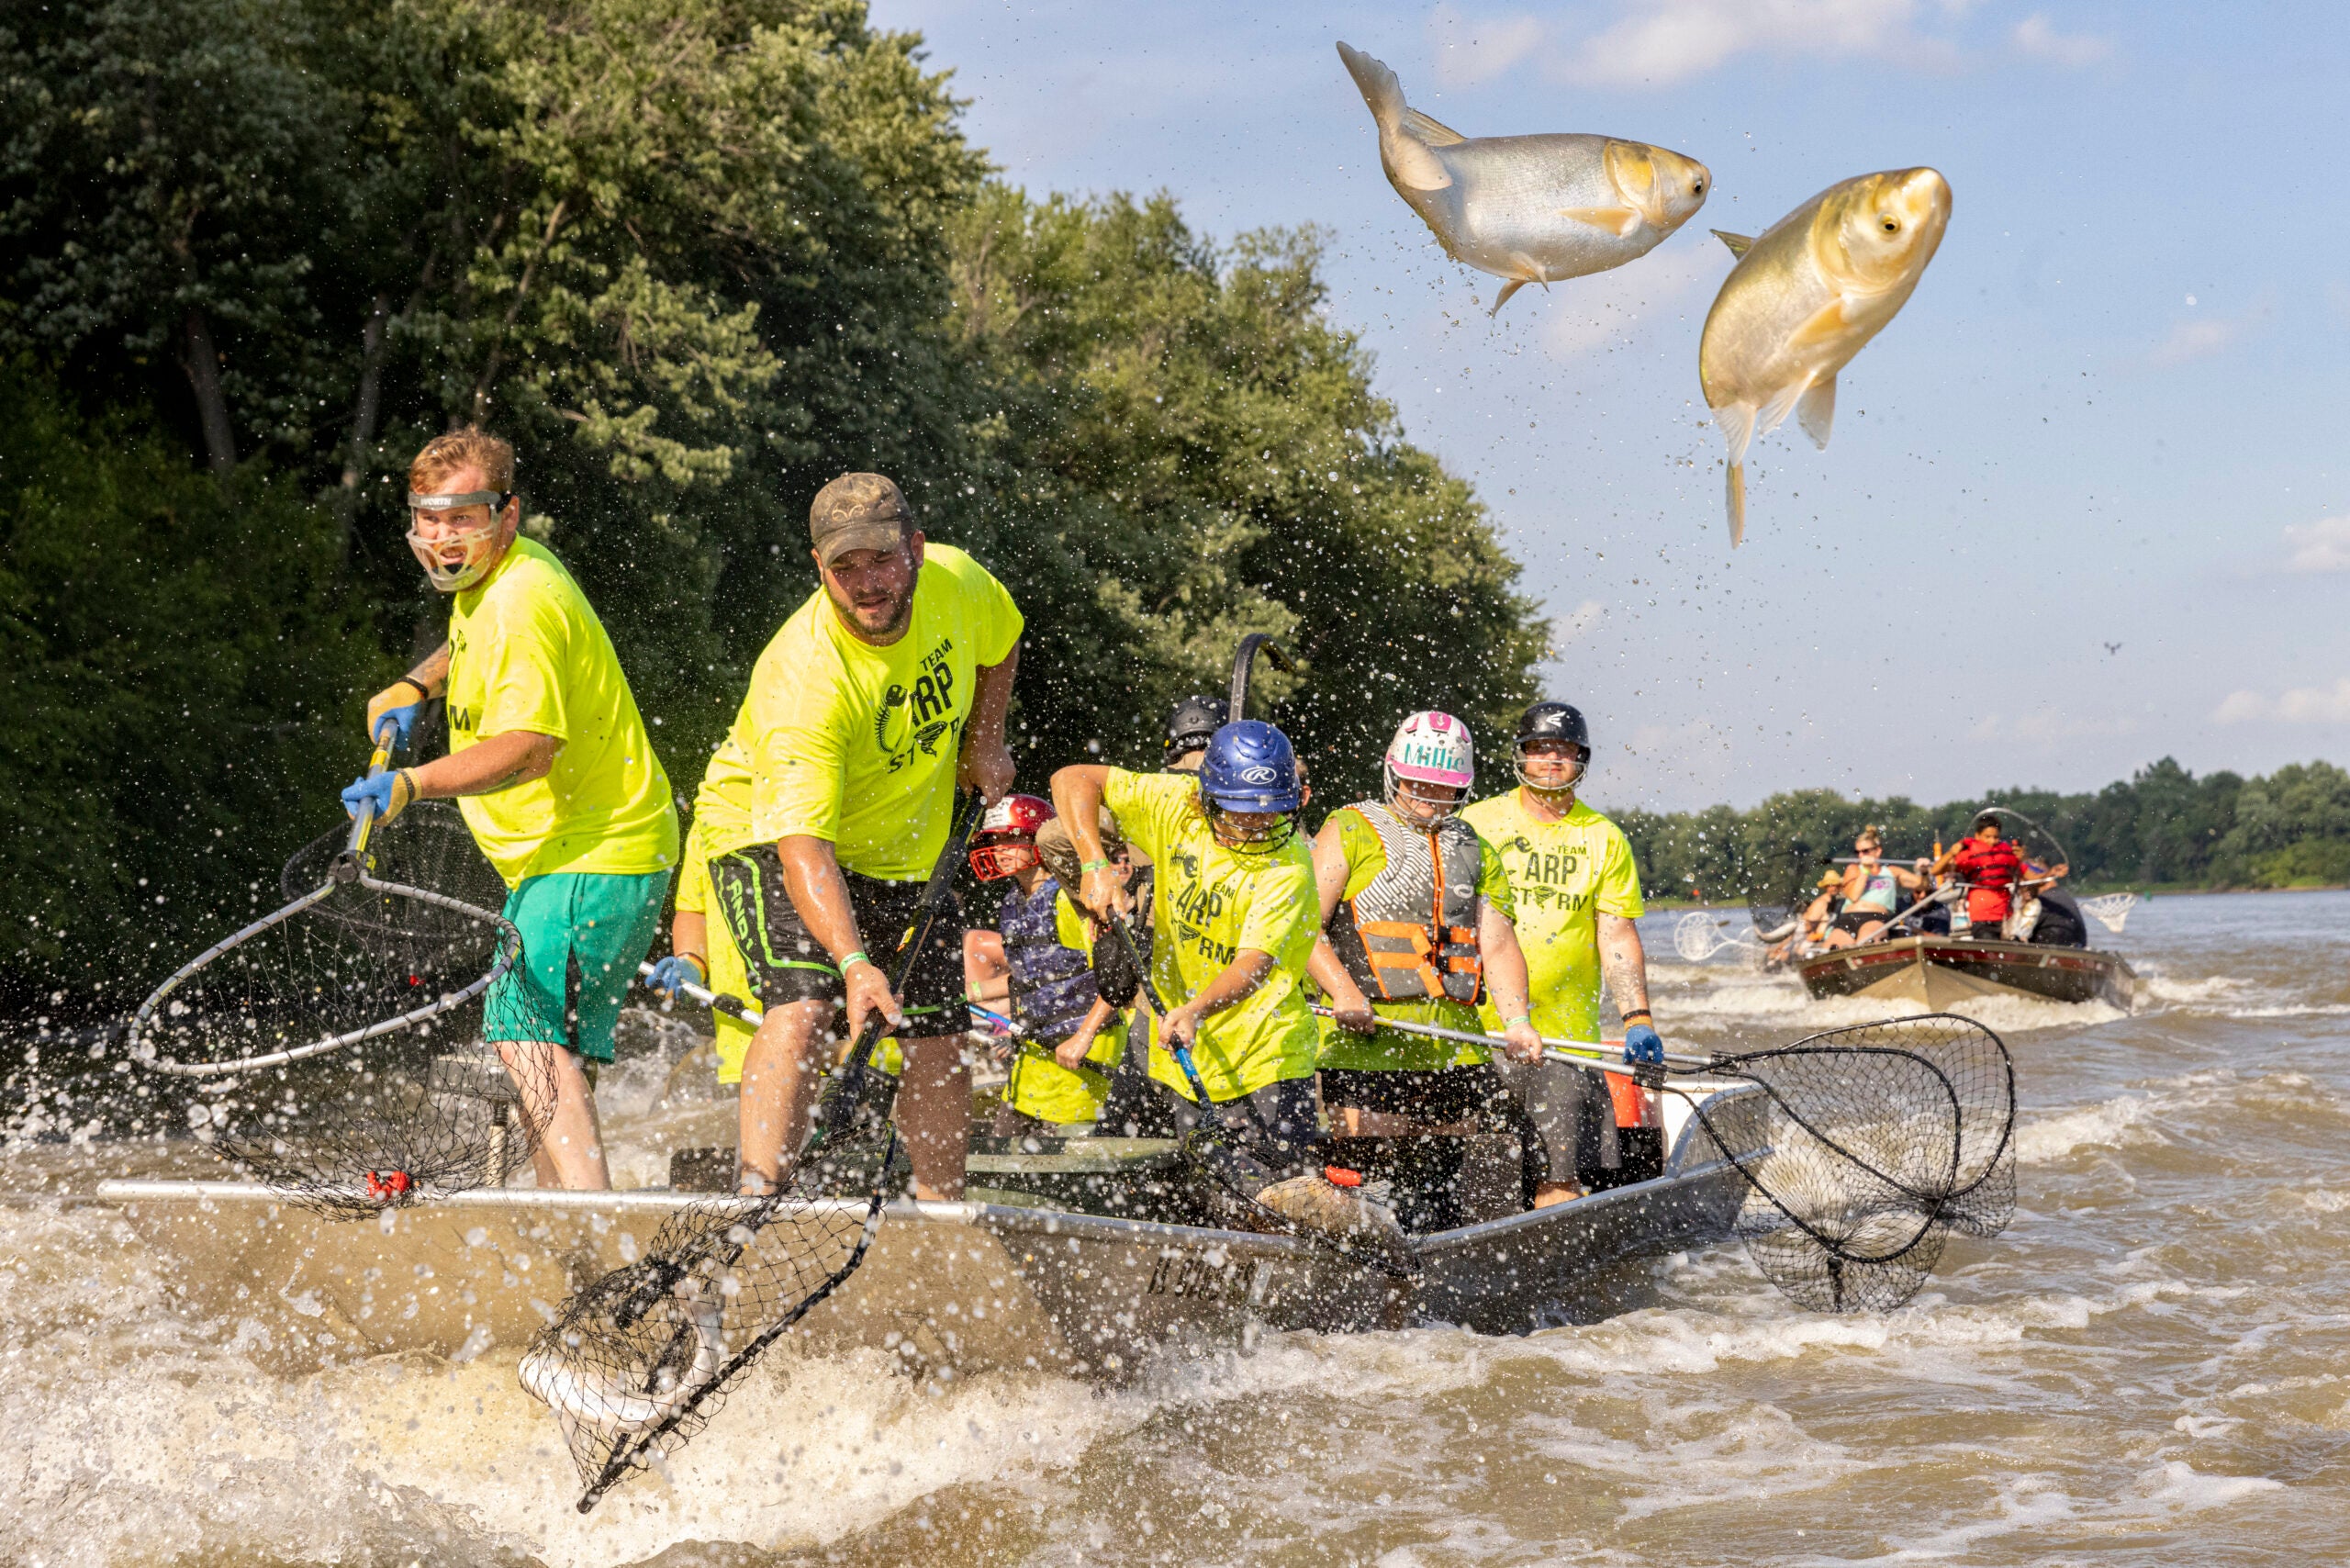 Annual Fishing Tournament Removes Thousands of Invasive Carp from the Illinois River